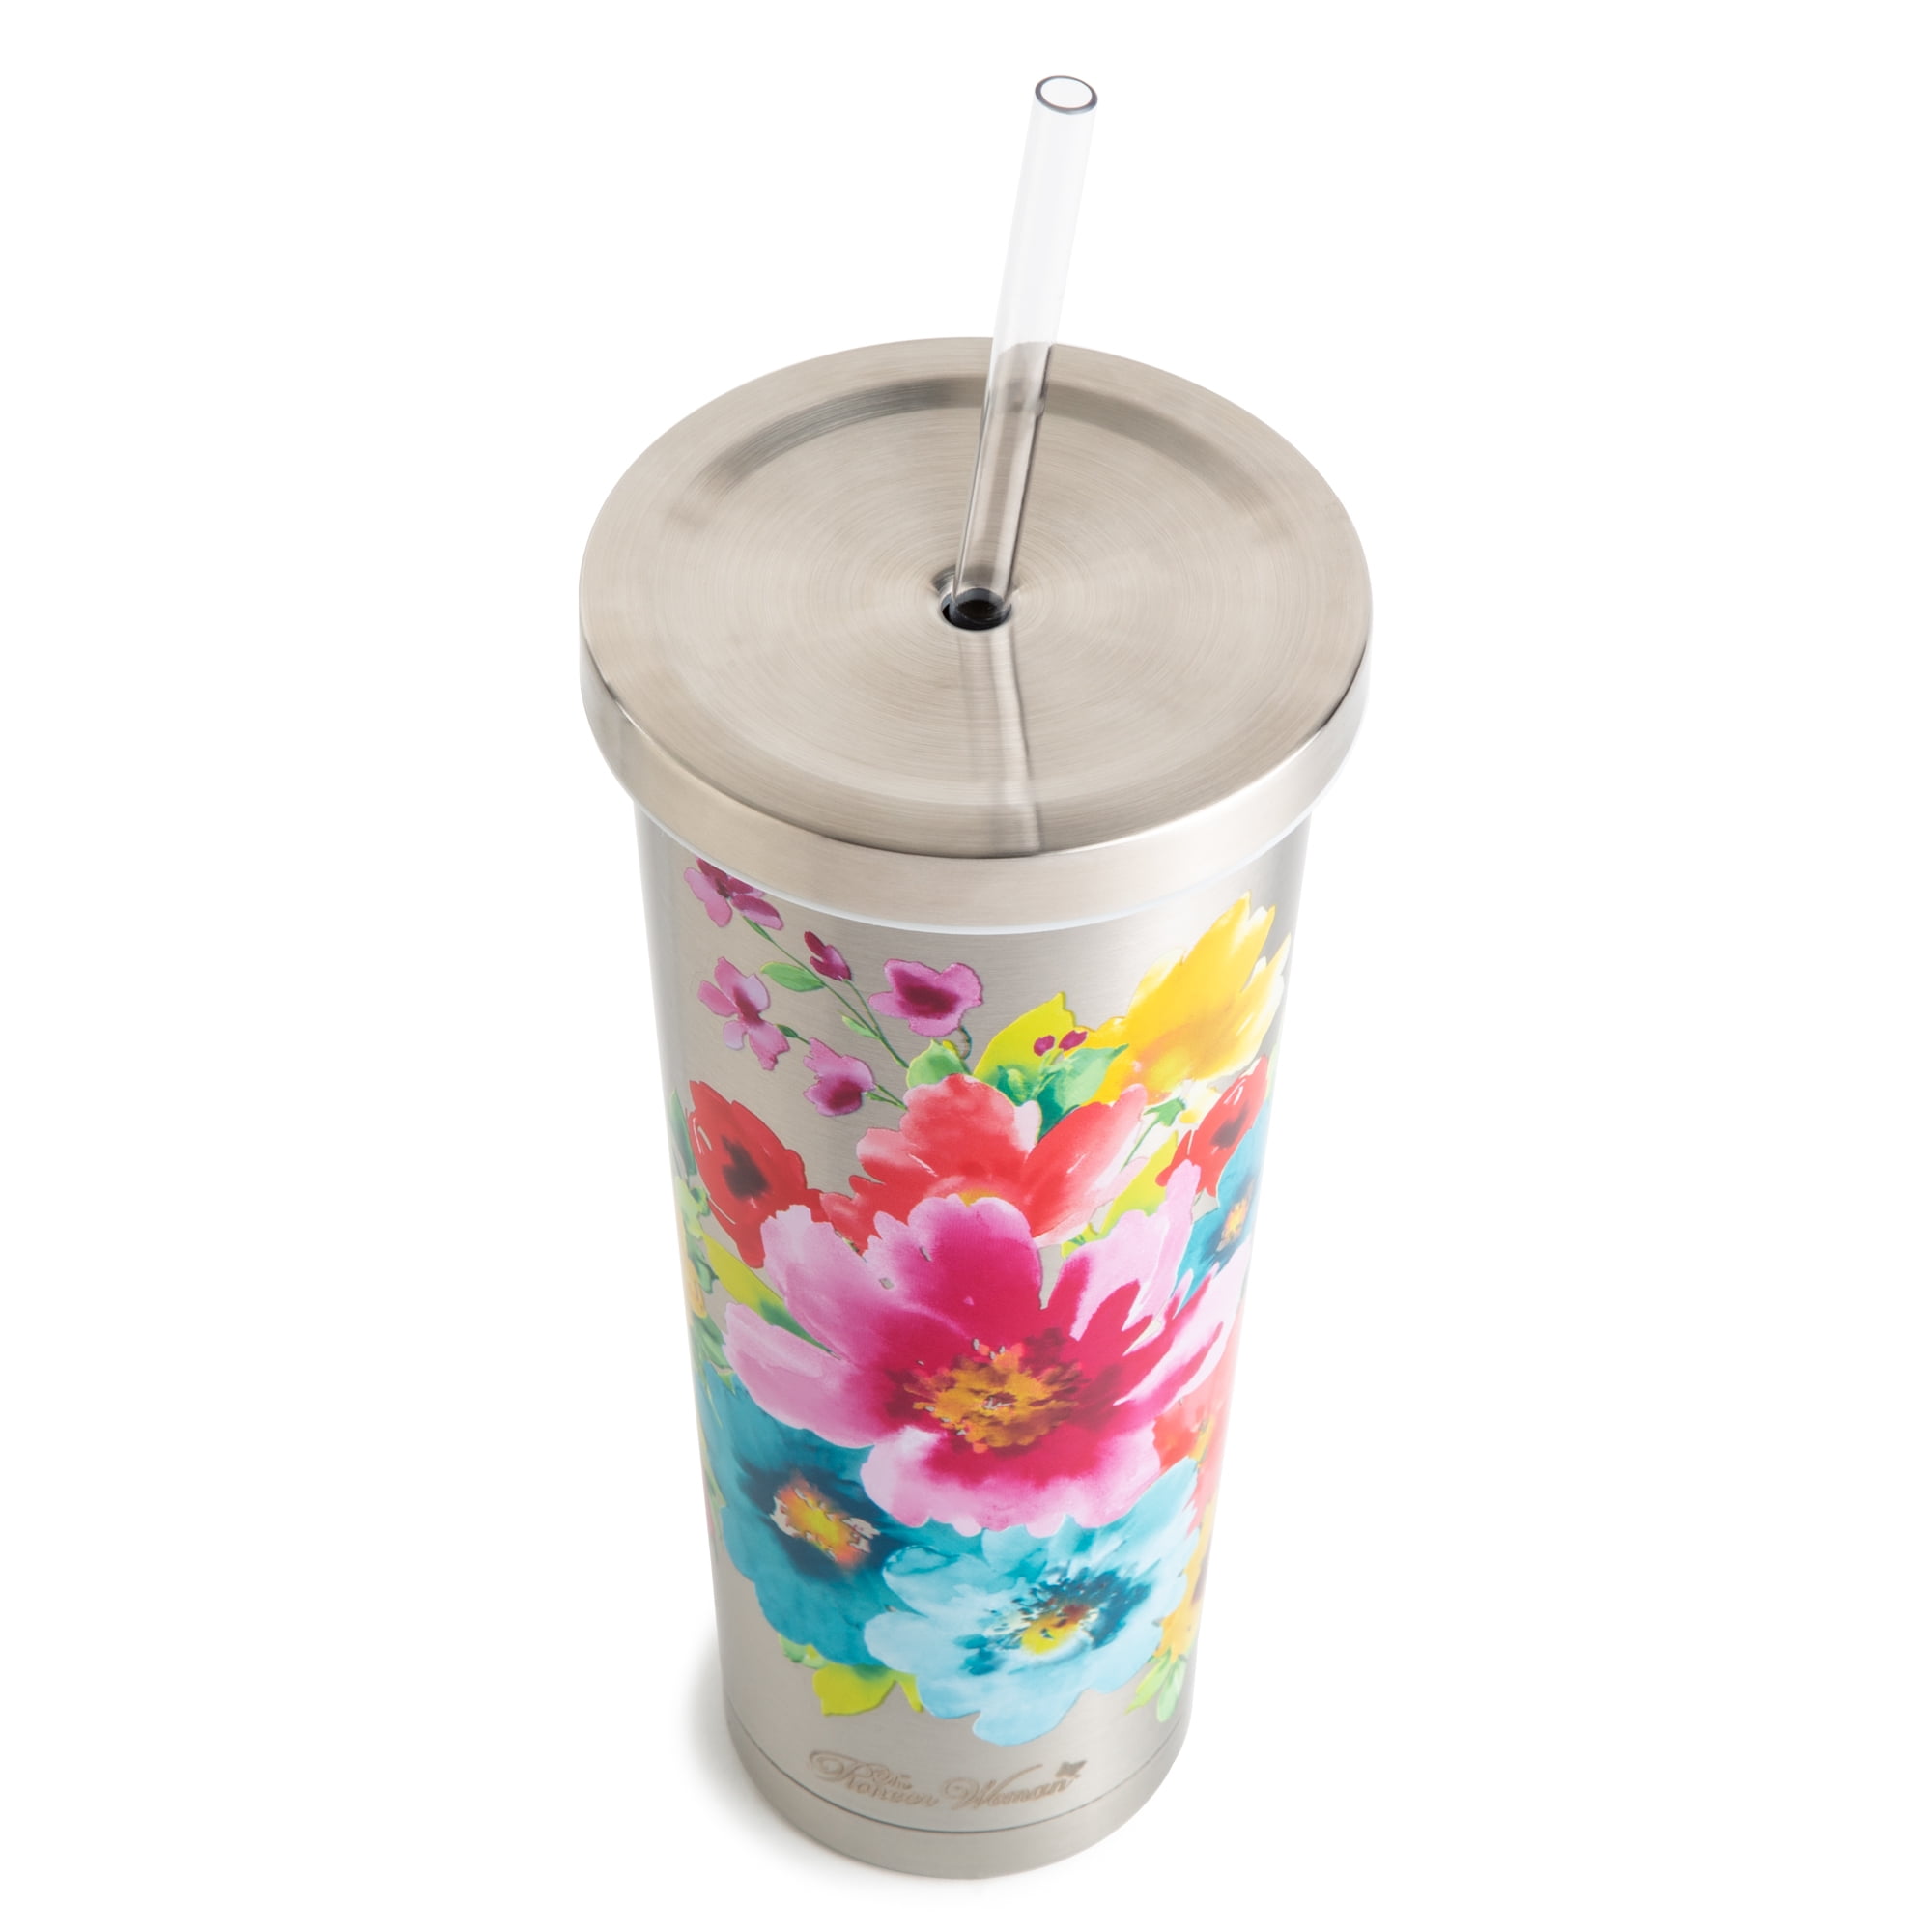 The Pioneer Woman Breezy Floral 24-Ounce Double Wall Vacuum